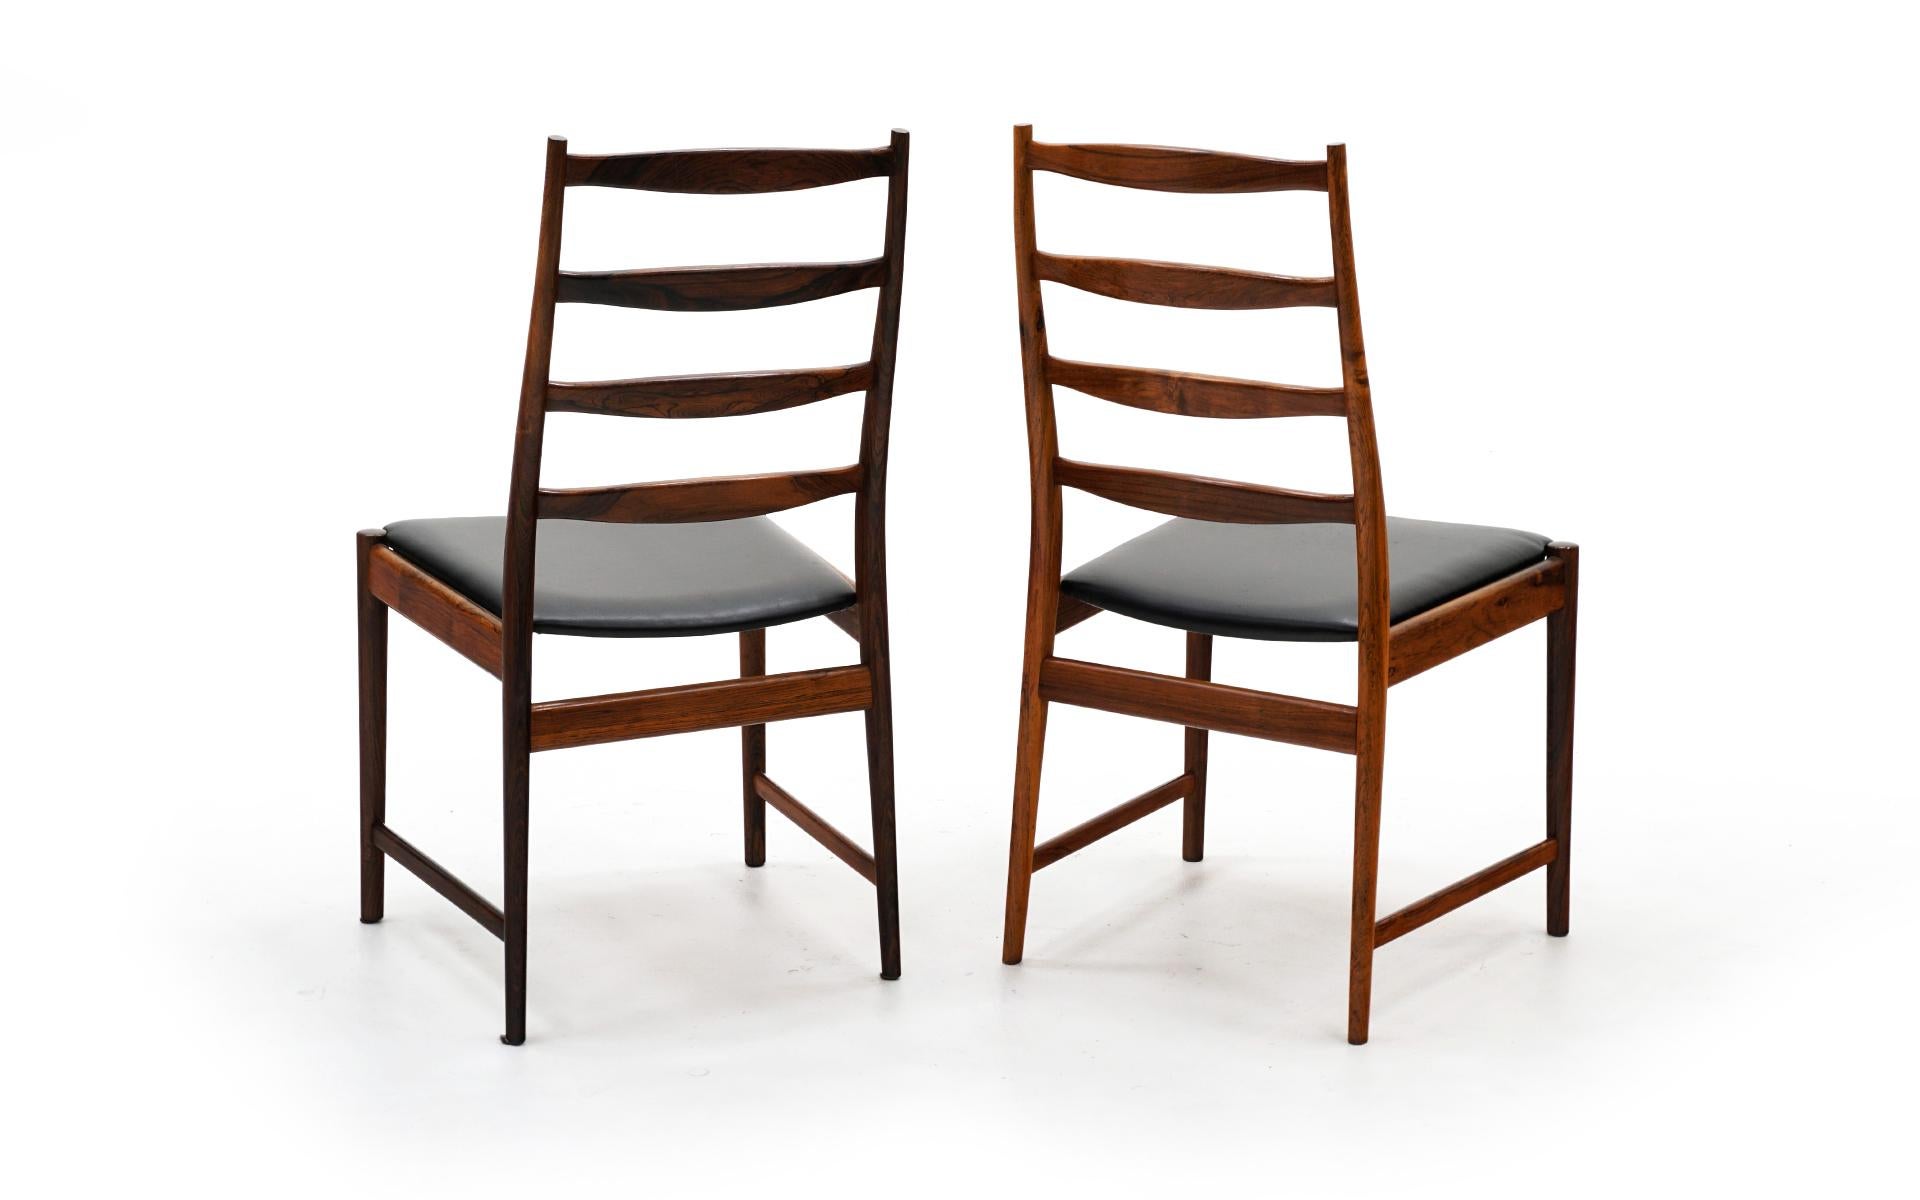 Six Danish Modern Rosewood Ladder Back Dining Chairs by Arne Vodder, Black Seats For Sale 1